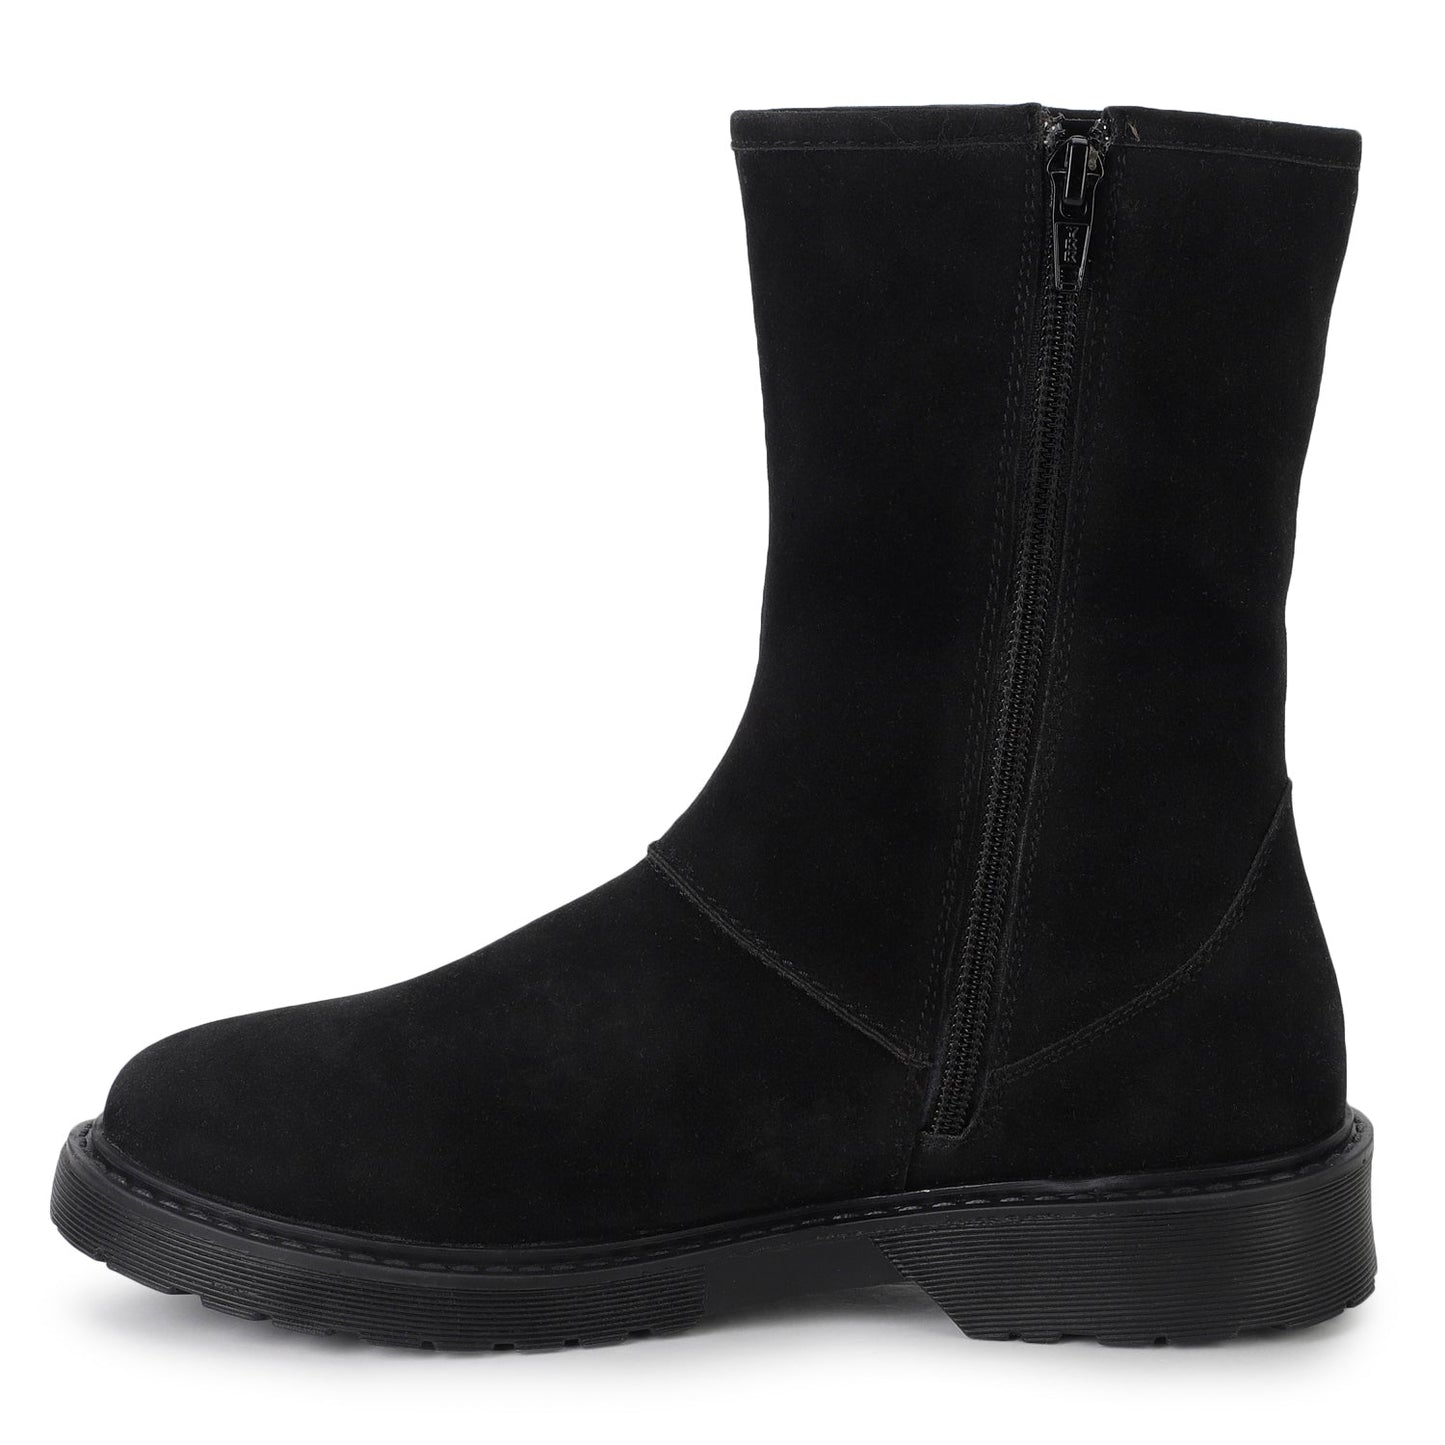 Slays Suede High Ankle Women Boots